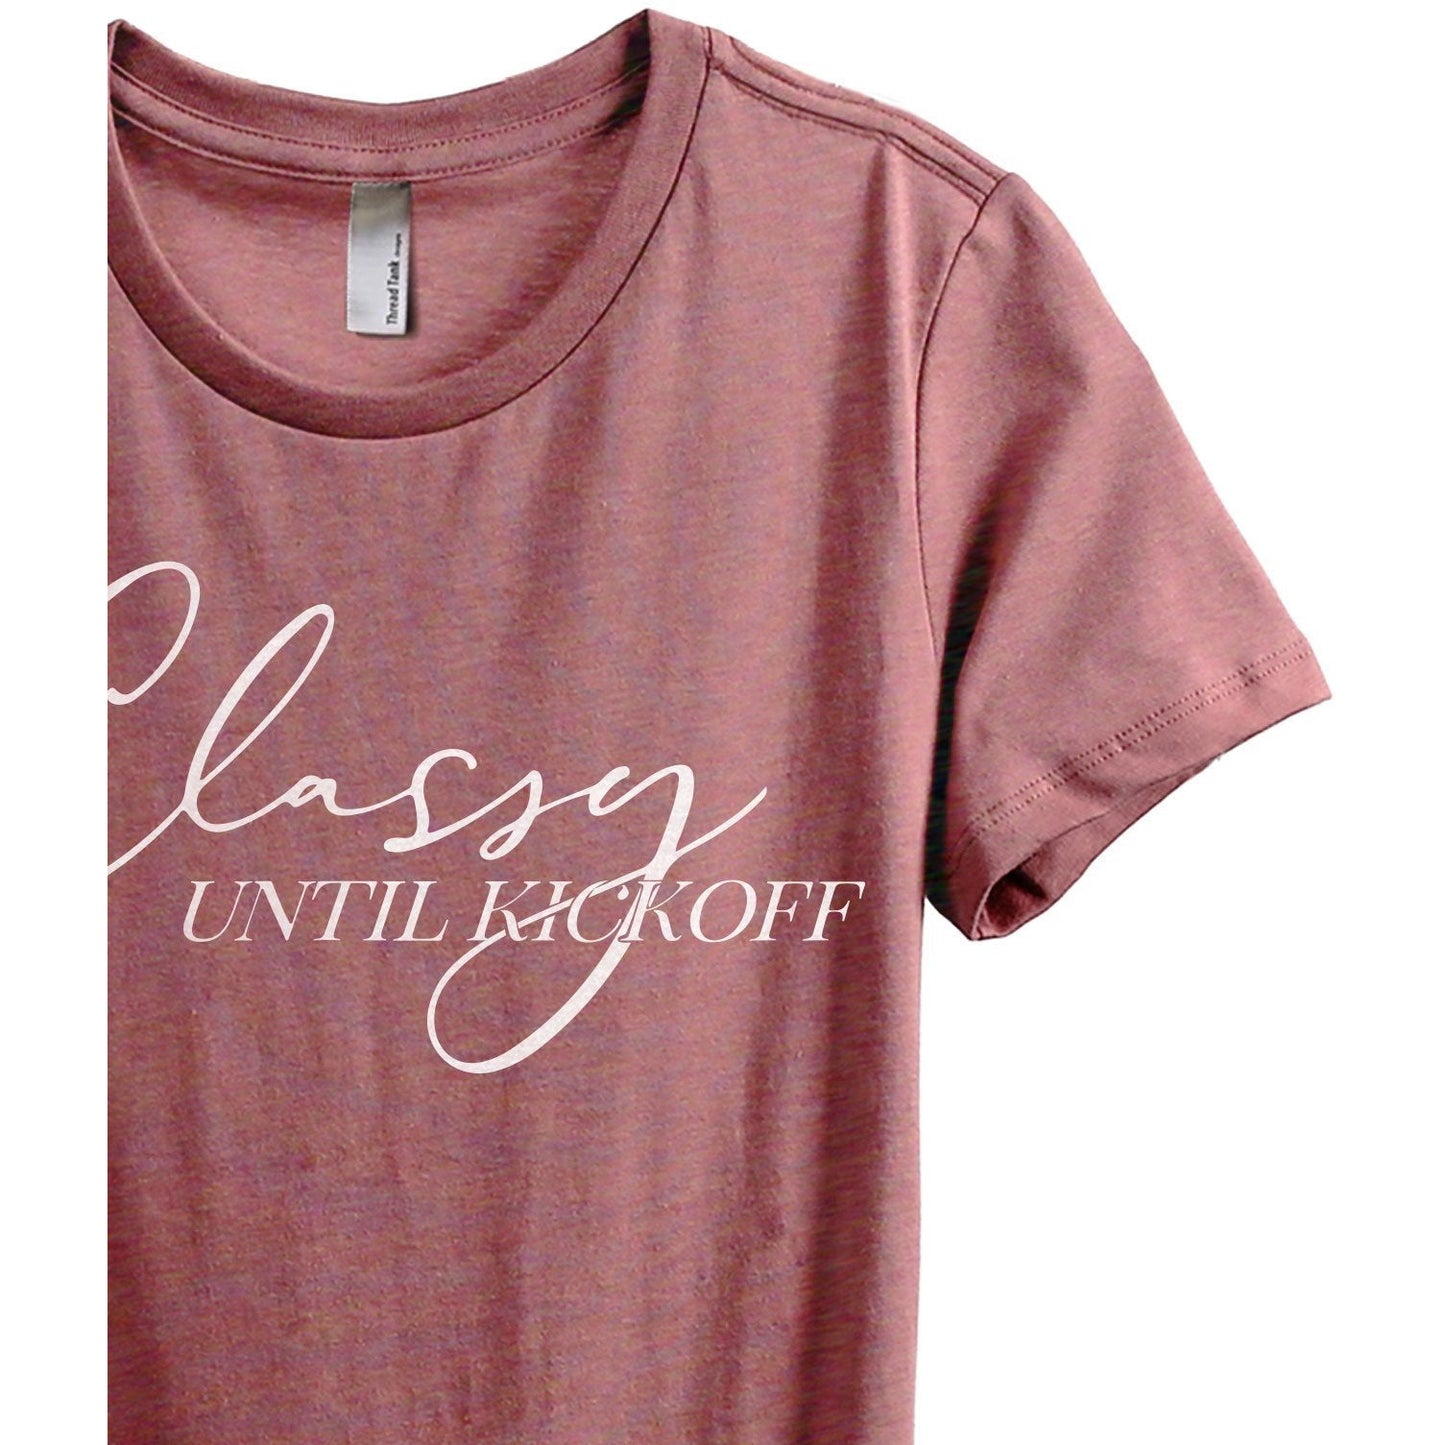 Classy Until Kickoff Women's Relaxed Crewneck T-Shirt Top Tee Heather Rouge Zoom Details
